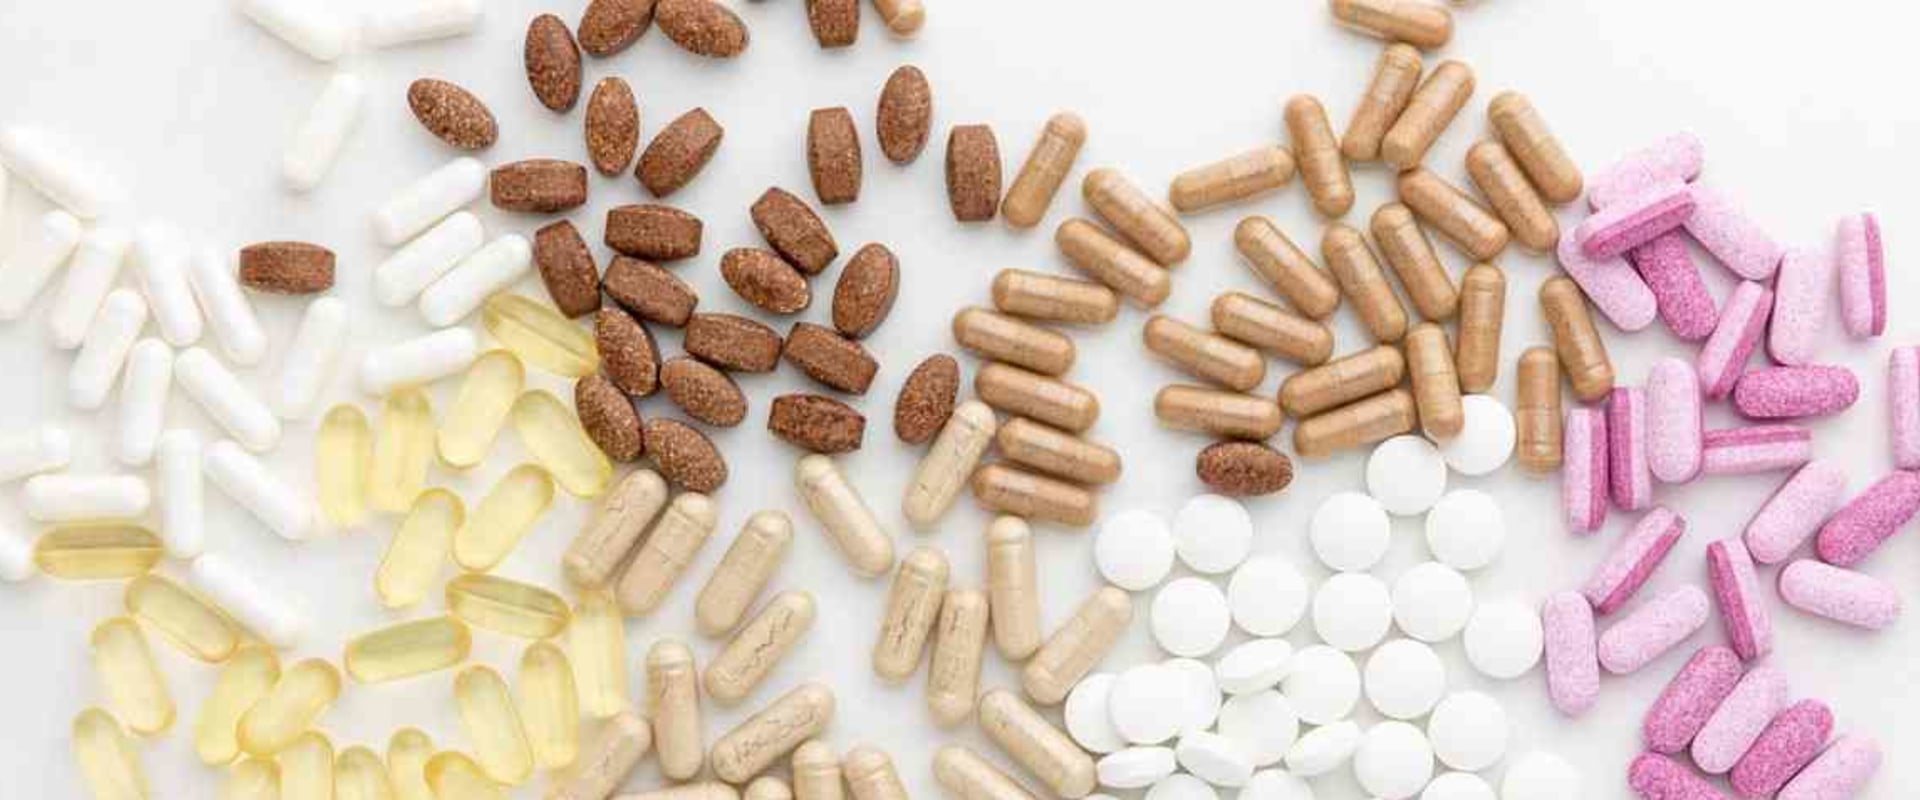 Which vitamins produce toxicity symptoms?